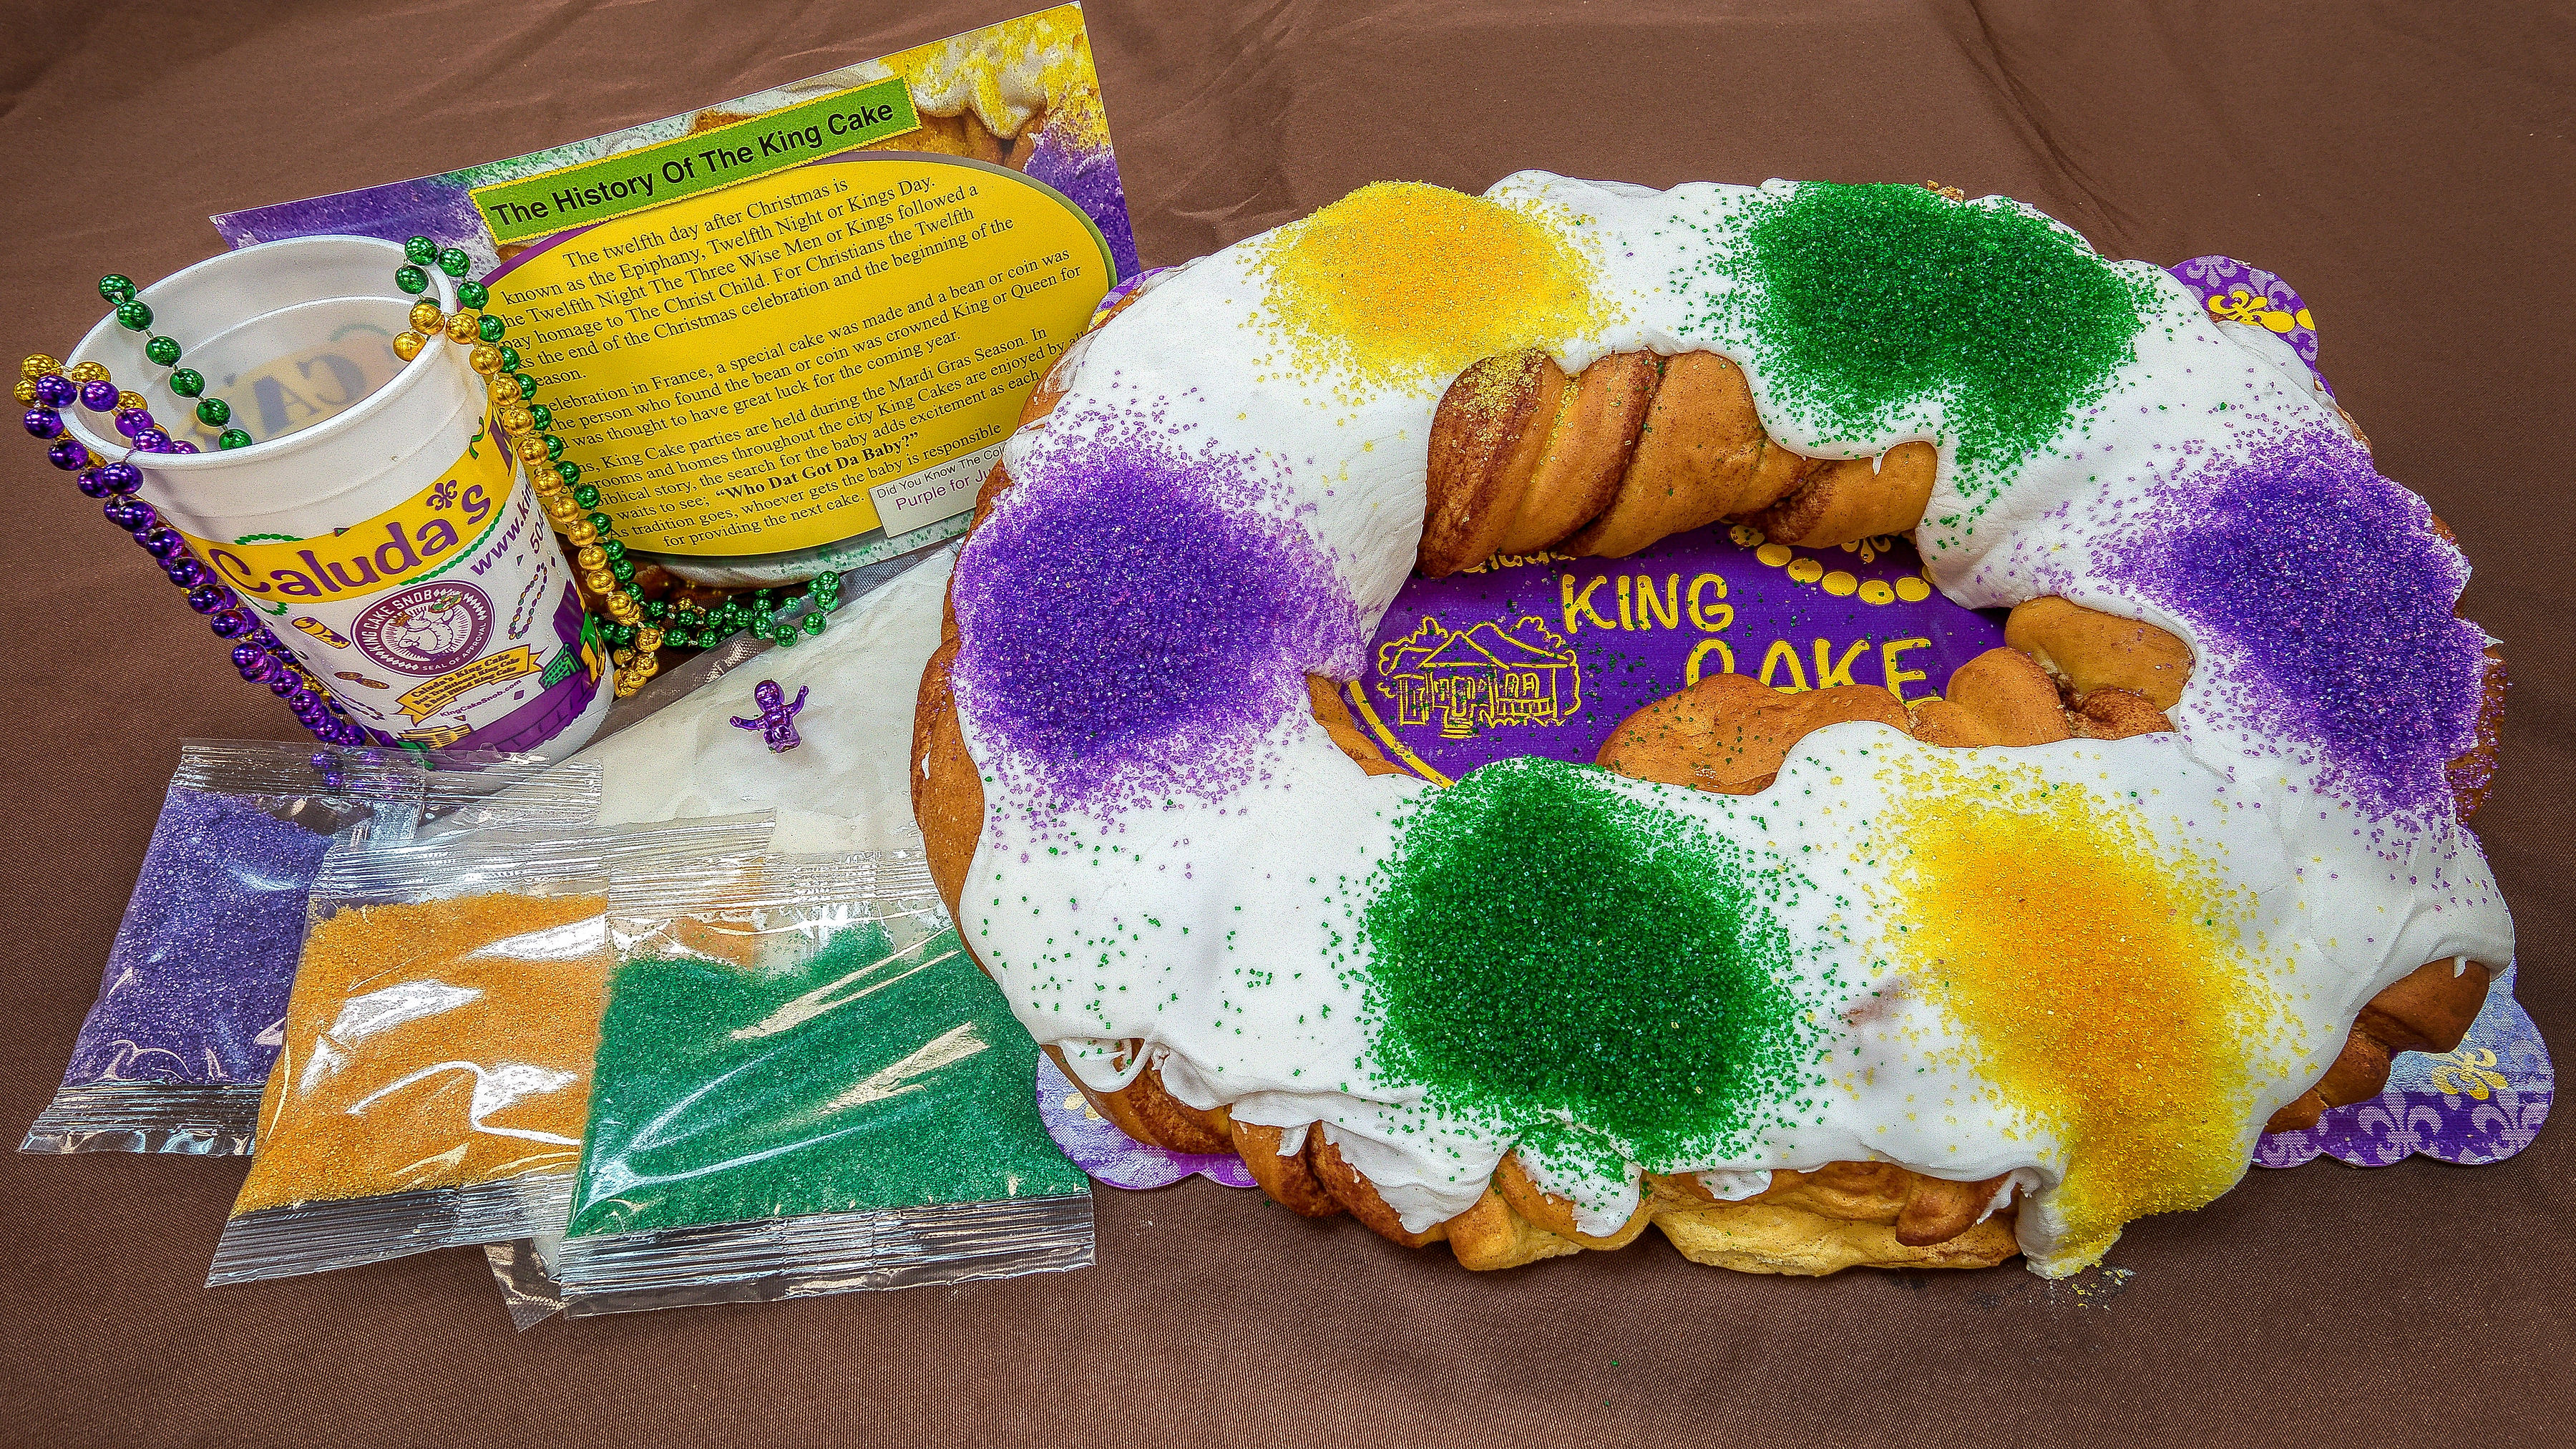 King Cake  Recipe history and tutorial for making this colorful braided  Mardi Gras cake from food his  King cake recipe King cake history Mardi  gras king cake